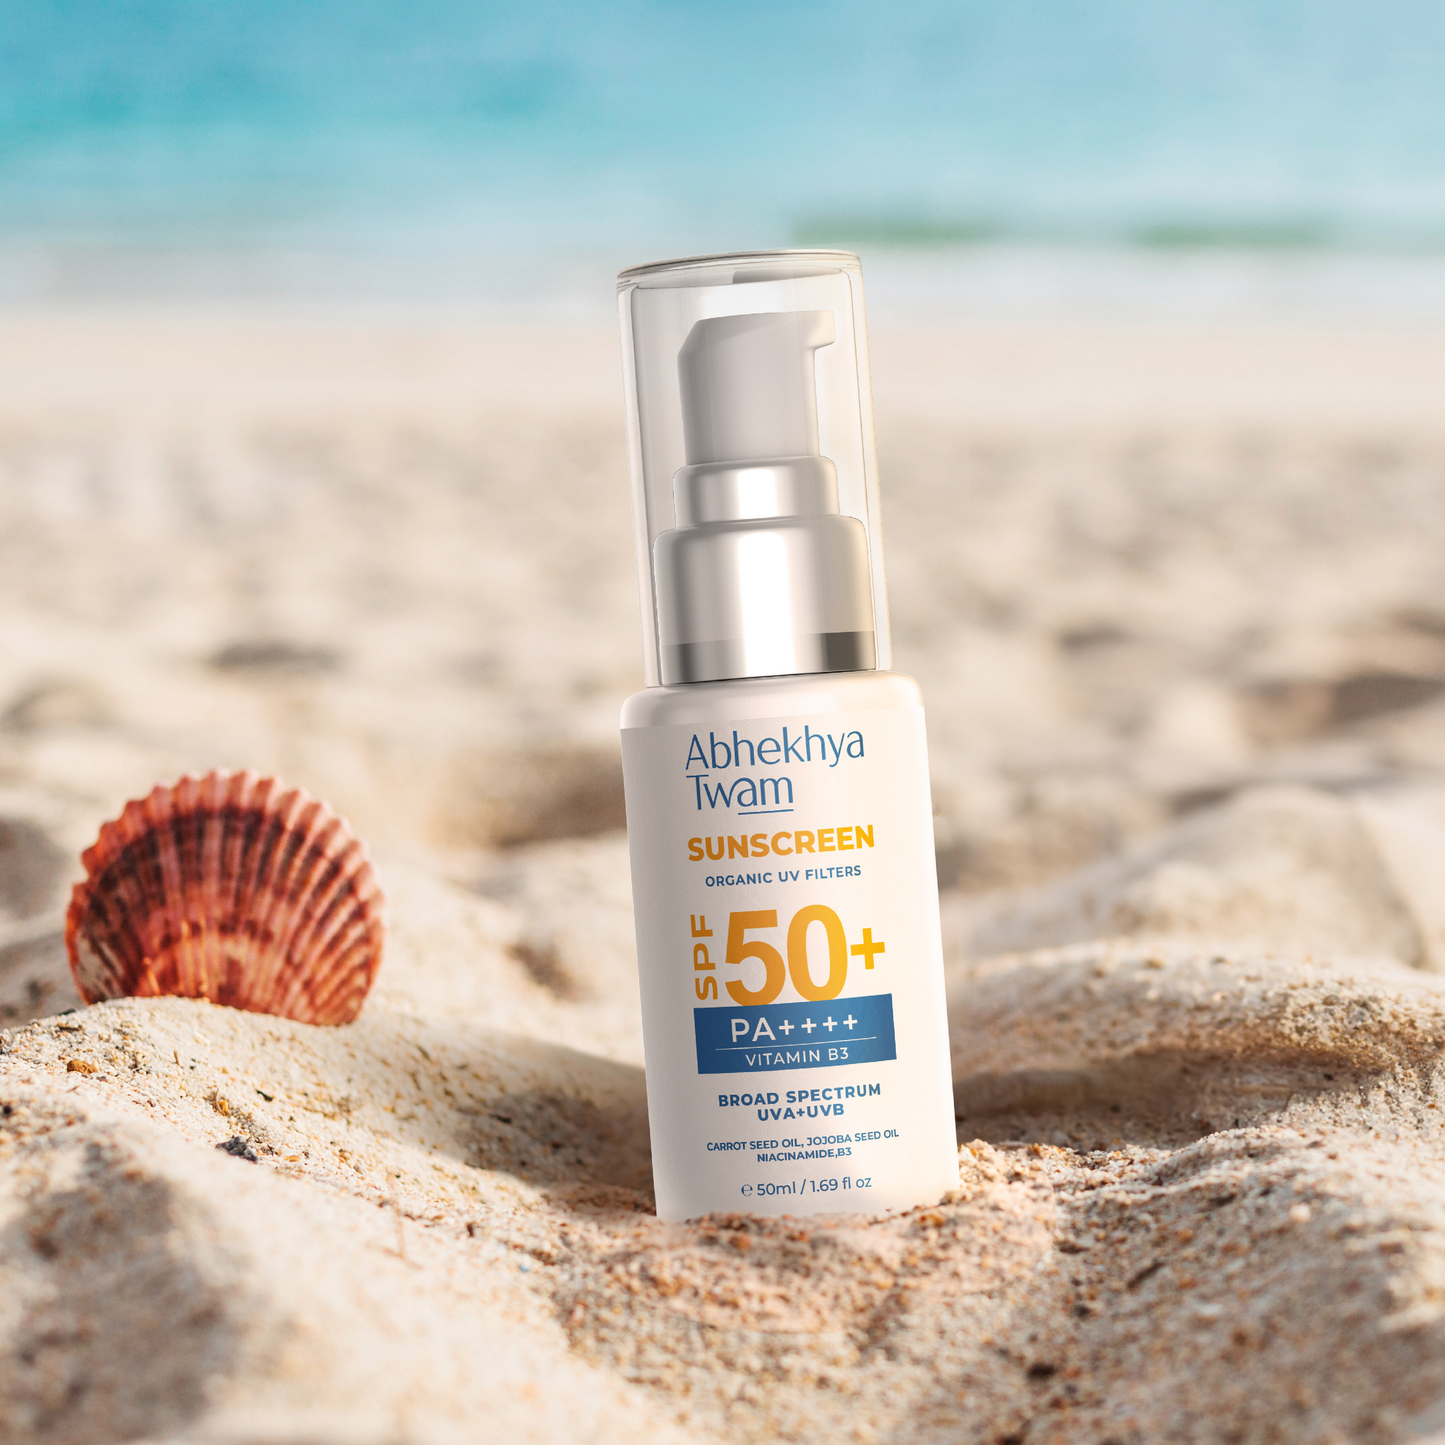 SUNSCREEN WITH SPF 50 PA ++++